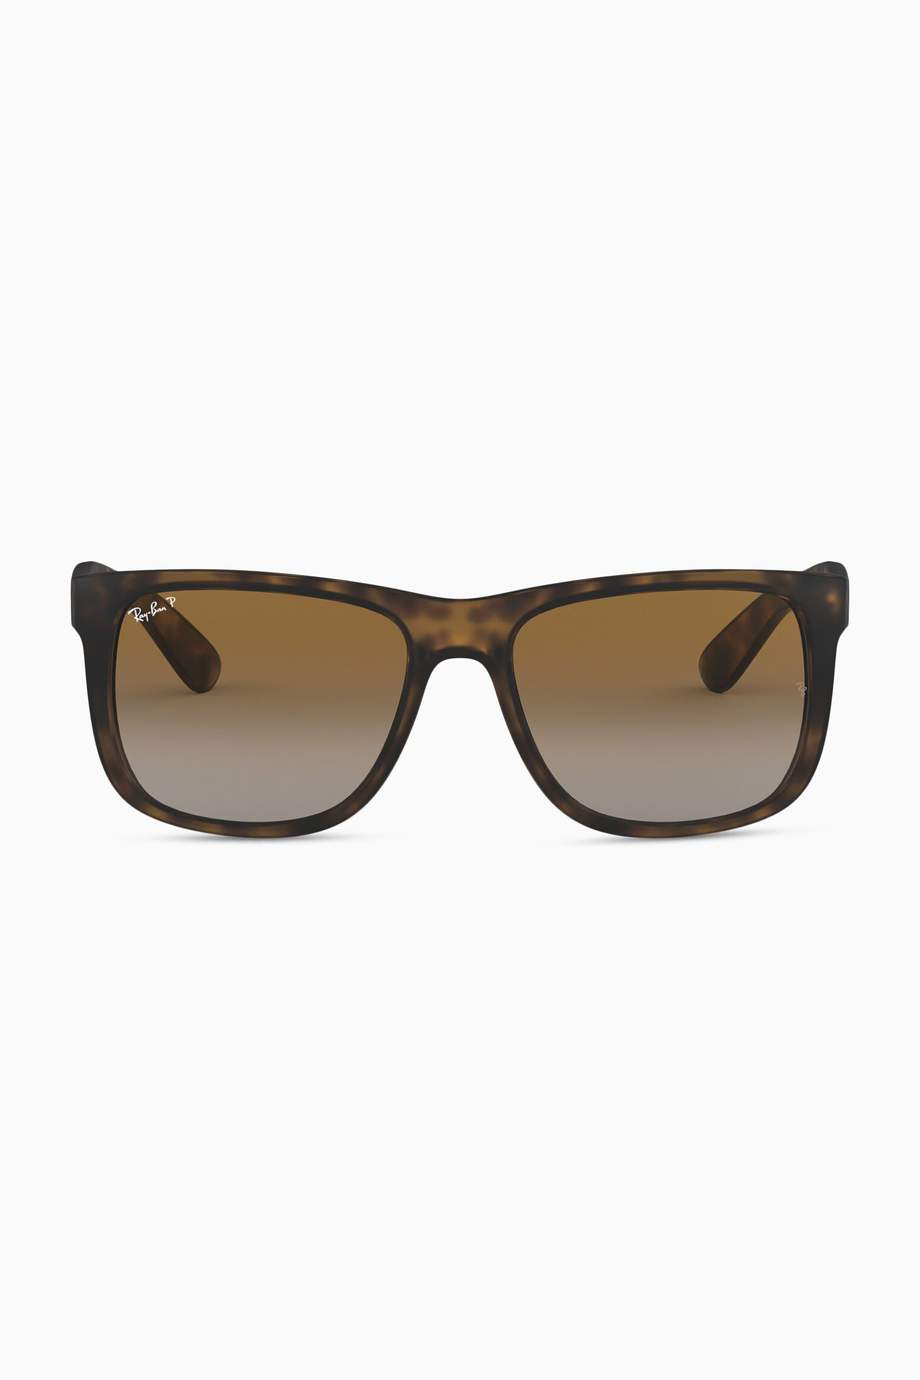 Shop Ray Ban Brown Justin Gradient Polarized Sunglasses For Men Ounass Uae